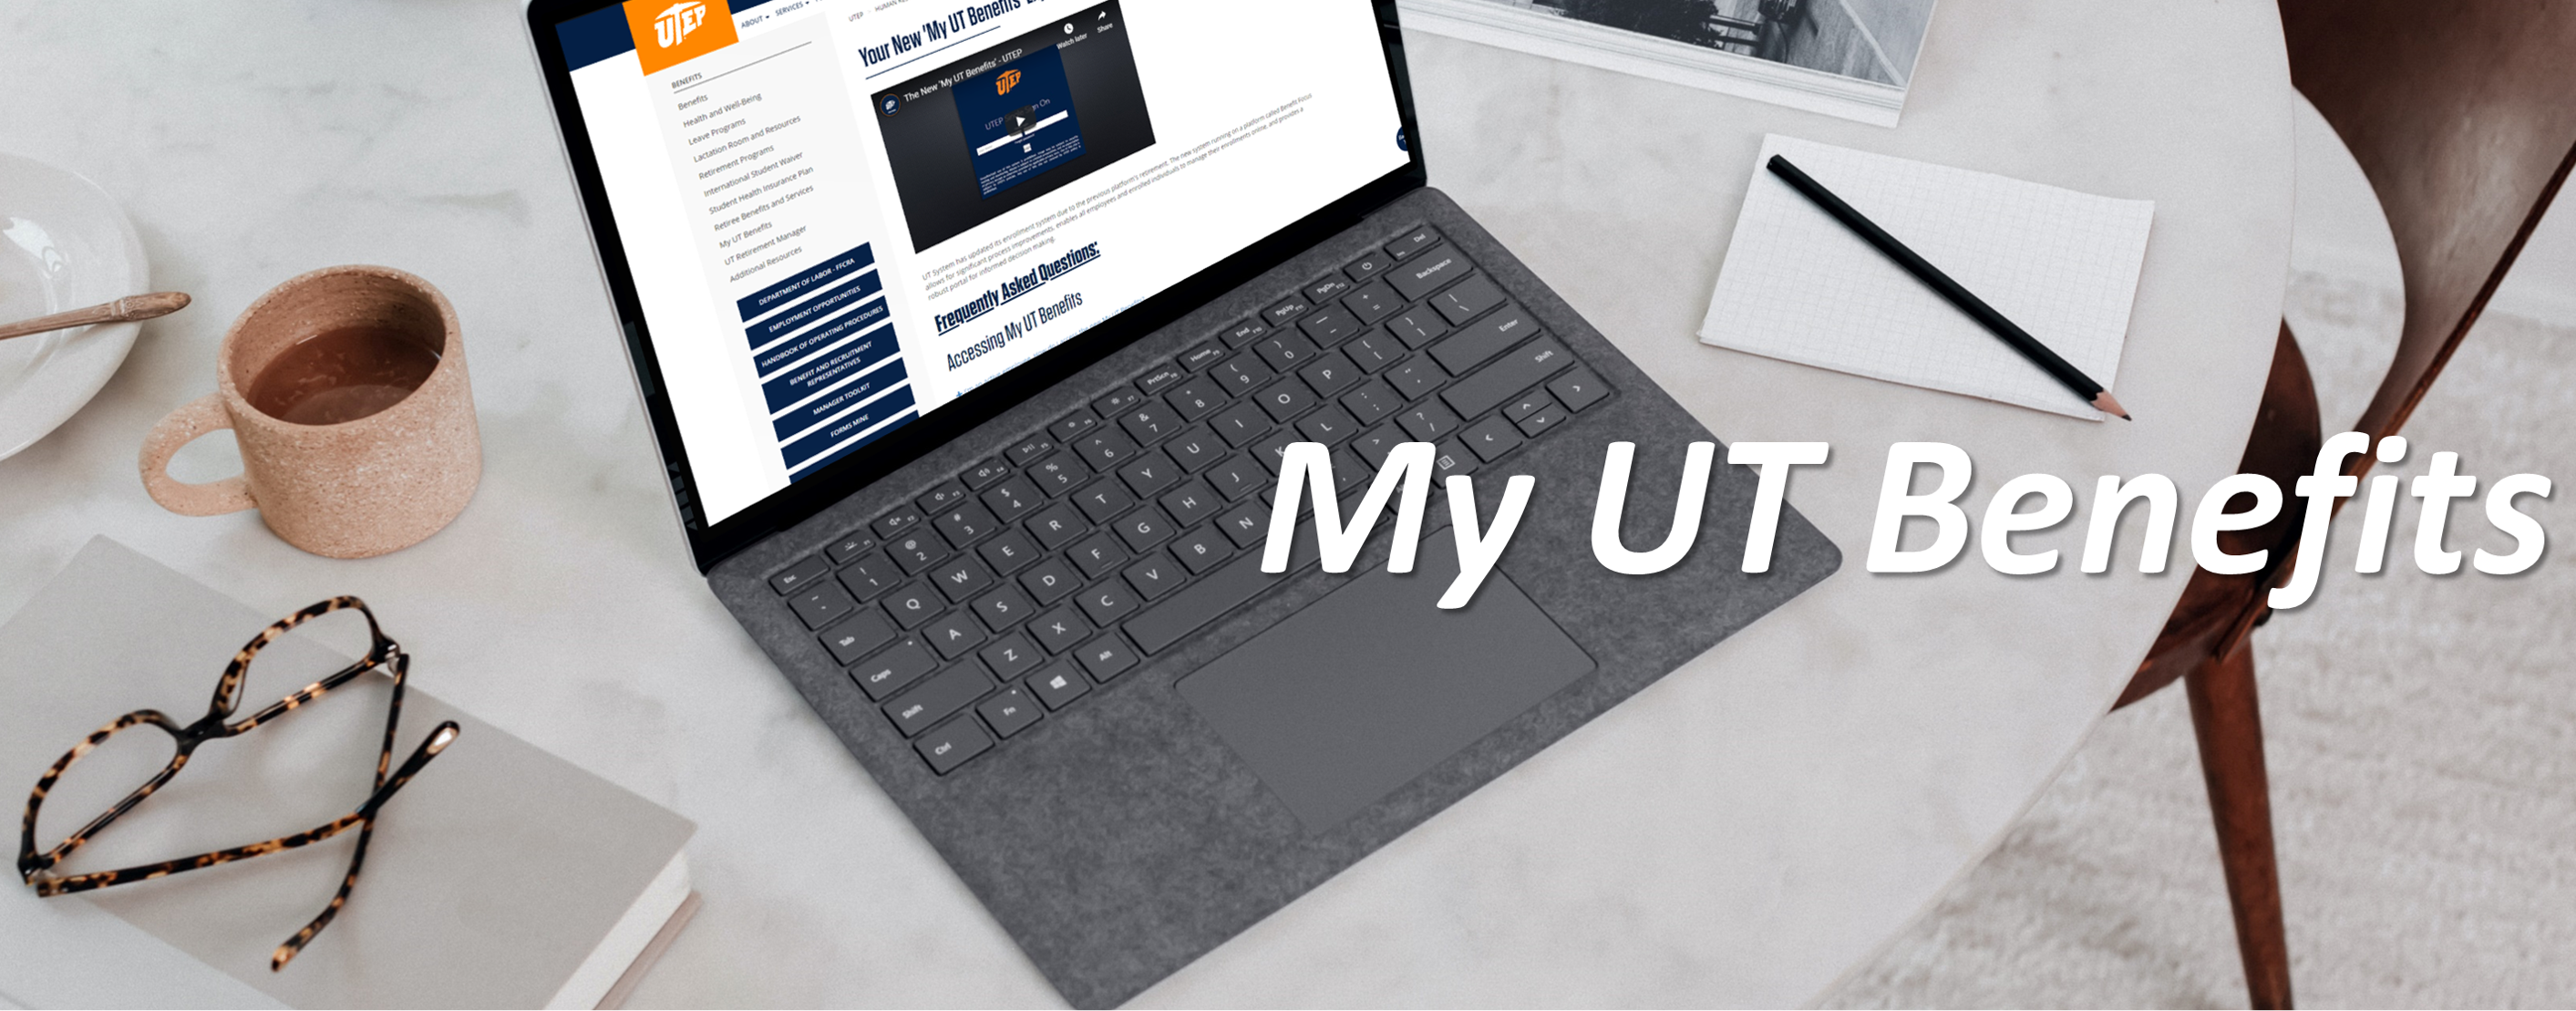 Your 'My UT Benefits' Experience 